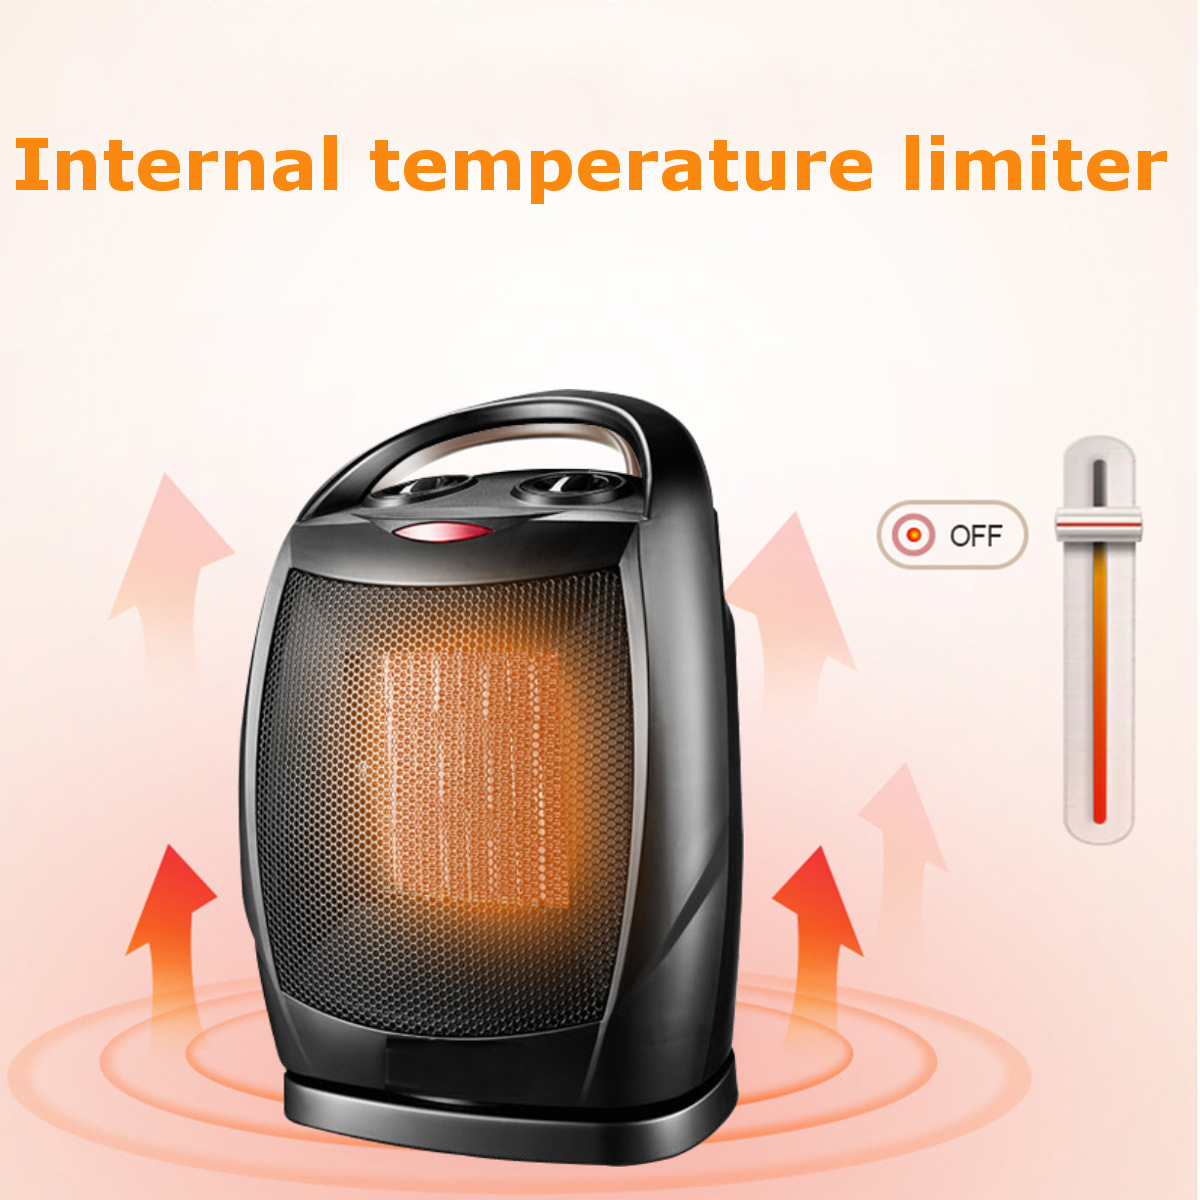 Portable Silent Heater Heating Fan Electric Room Office Thermostat Warm Machine 13